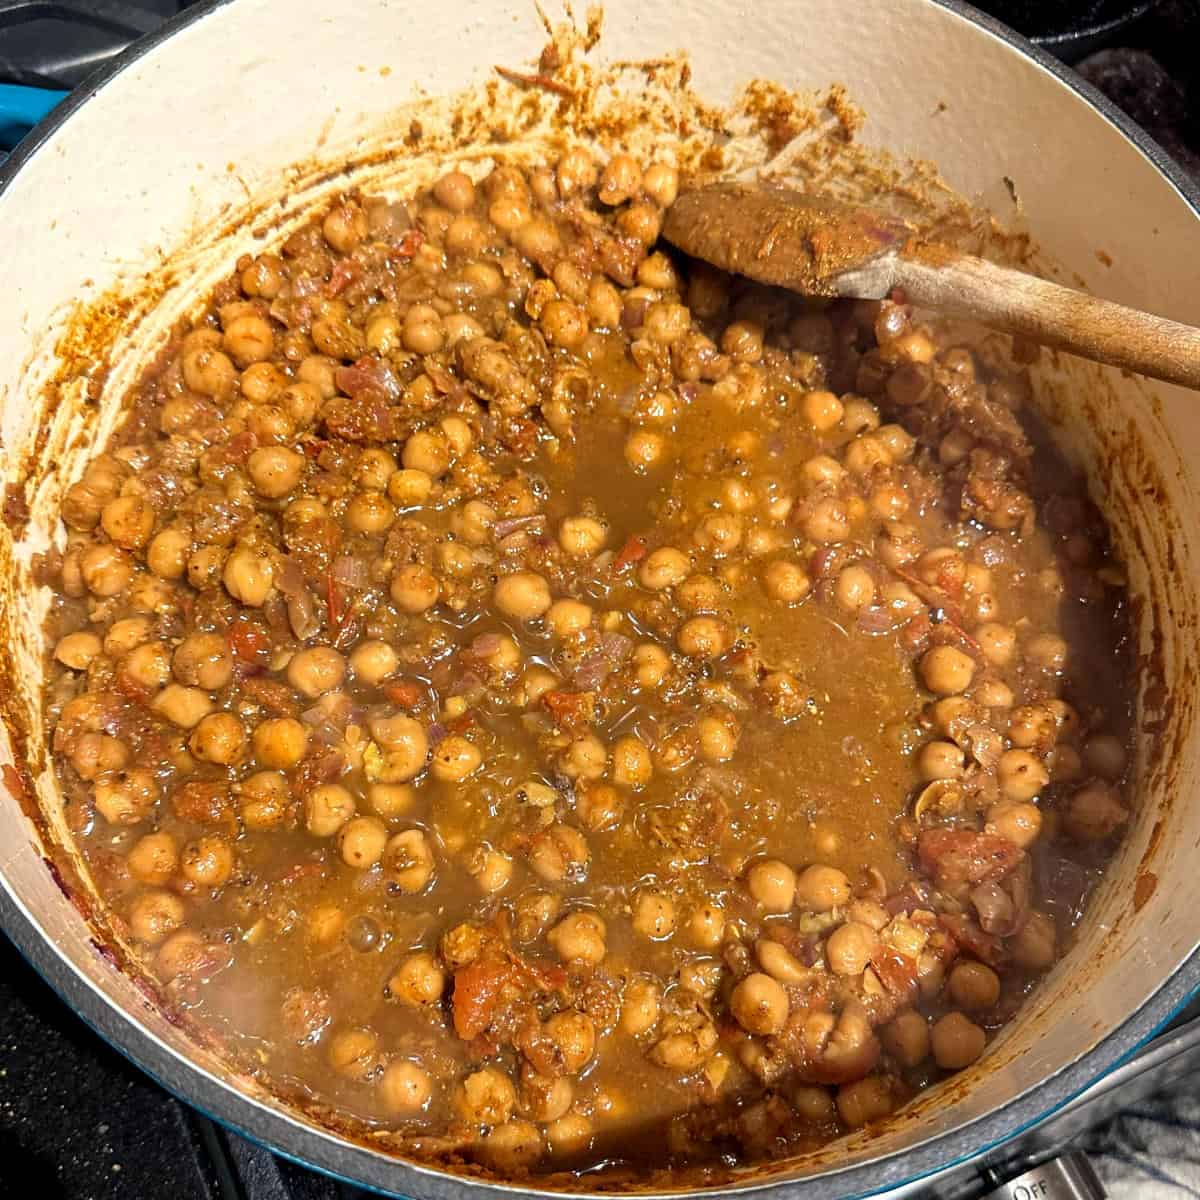 Chickpeas simmering with liquid in pot.